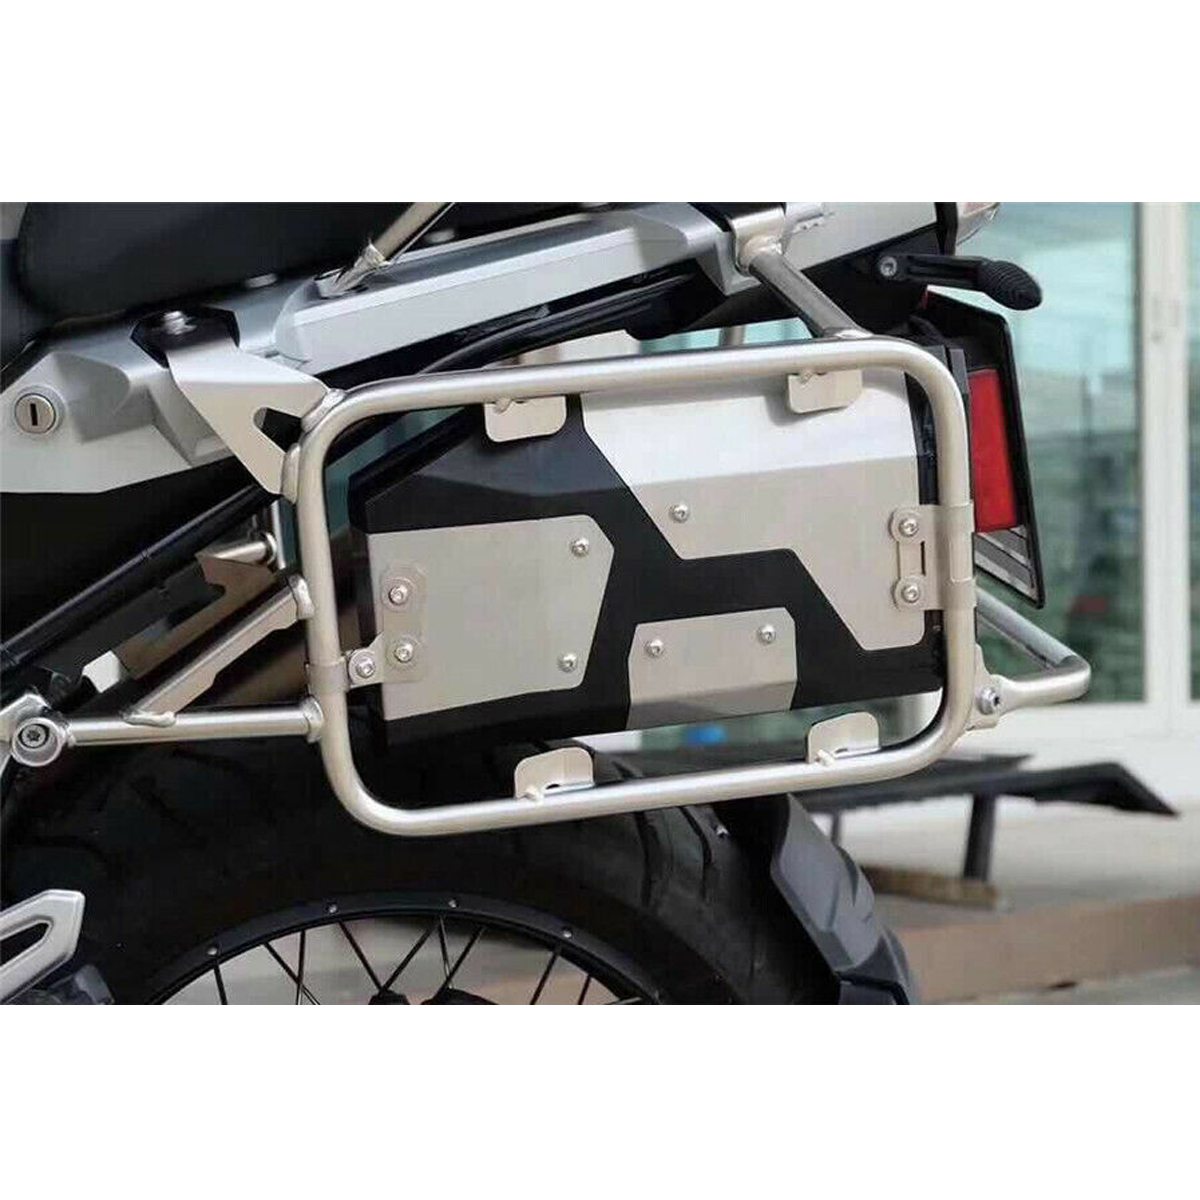 42L-Motorcycle-Stainless-Side-Tool-Box-With-Bracket-For-BMW-R1200GS-R1250GS-ADV-LC-Adventure-1463034